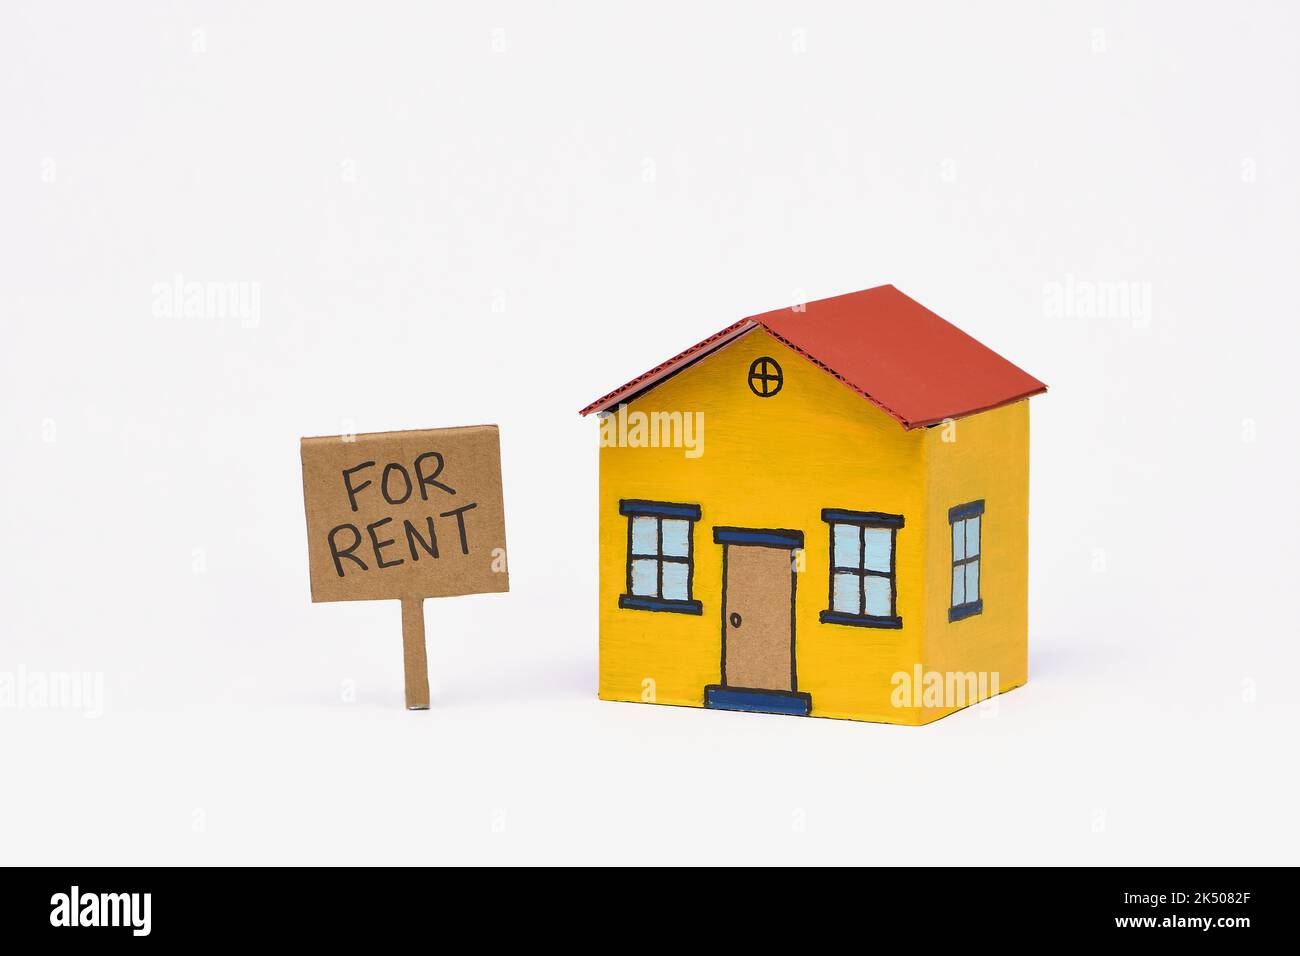 A yellow and red toy cardboard house in the middle of frame isolated on a white background with a Realestate For Rent sign, captured in a studio Stock Photo